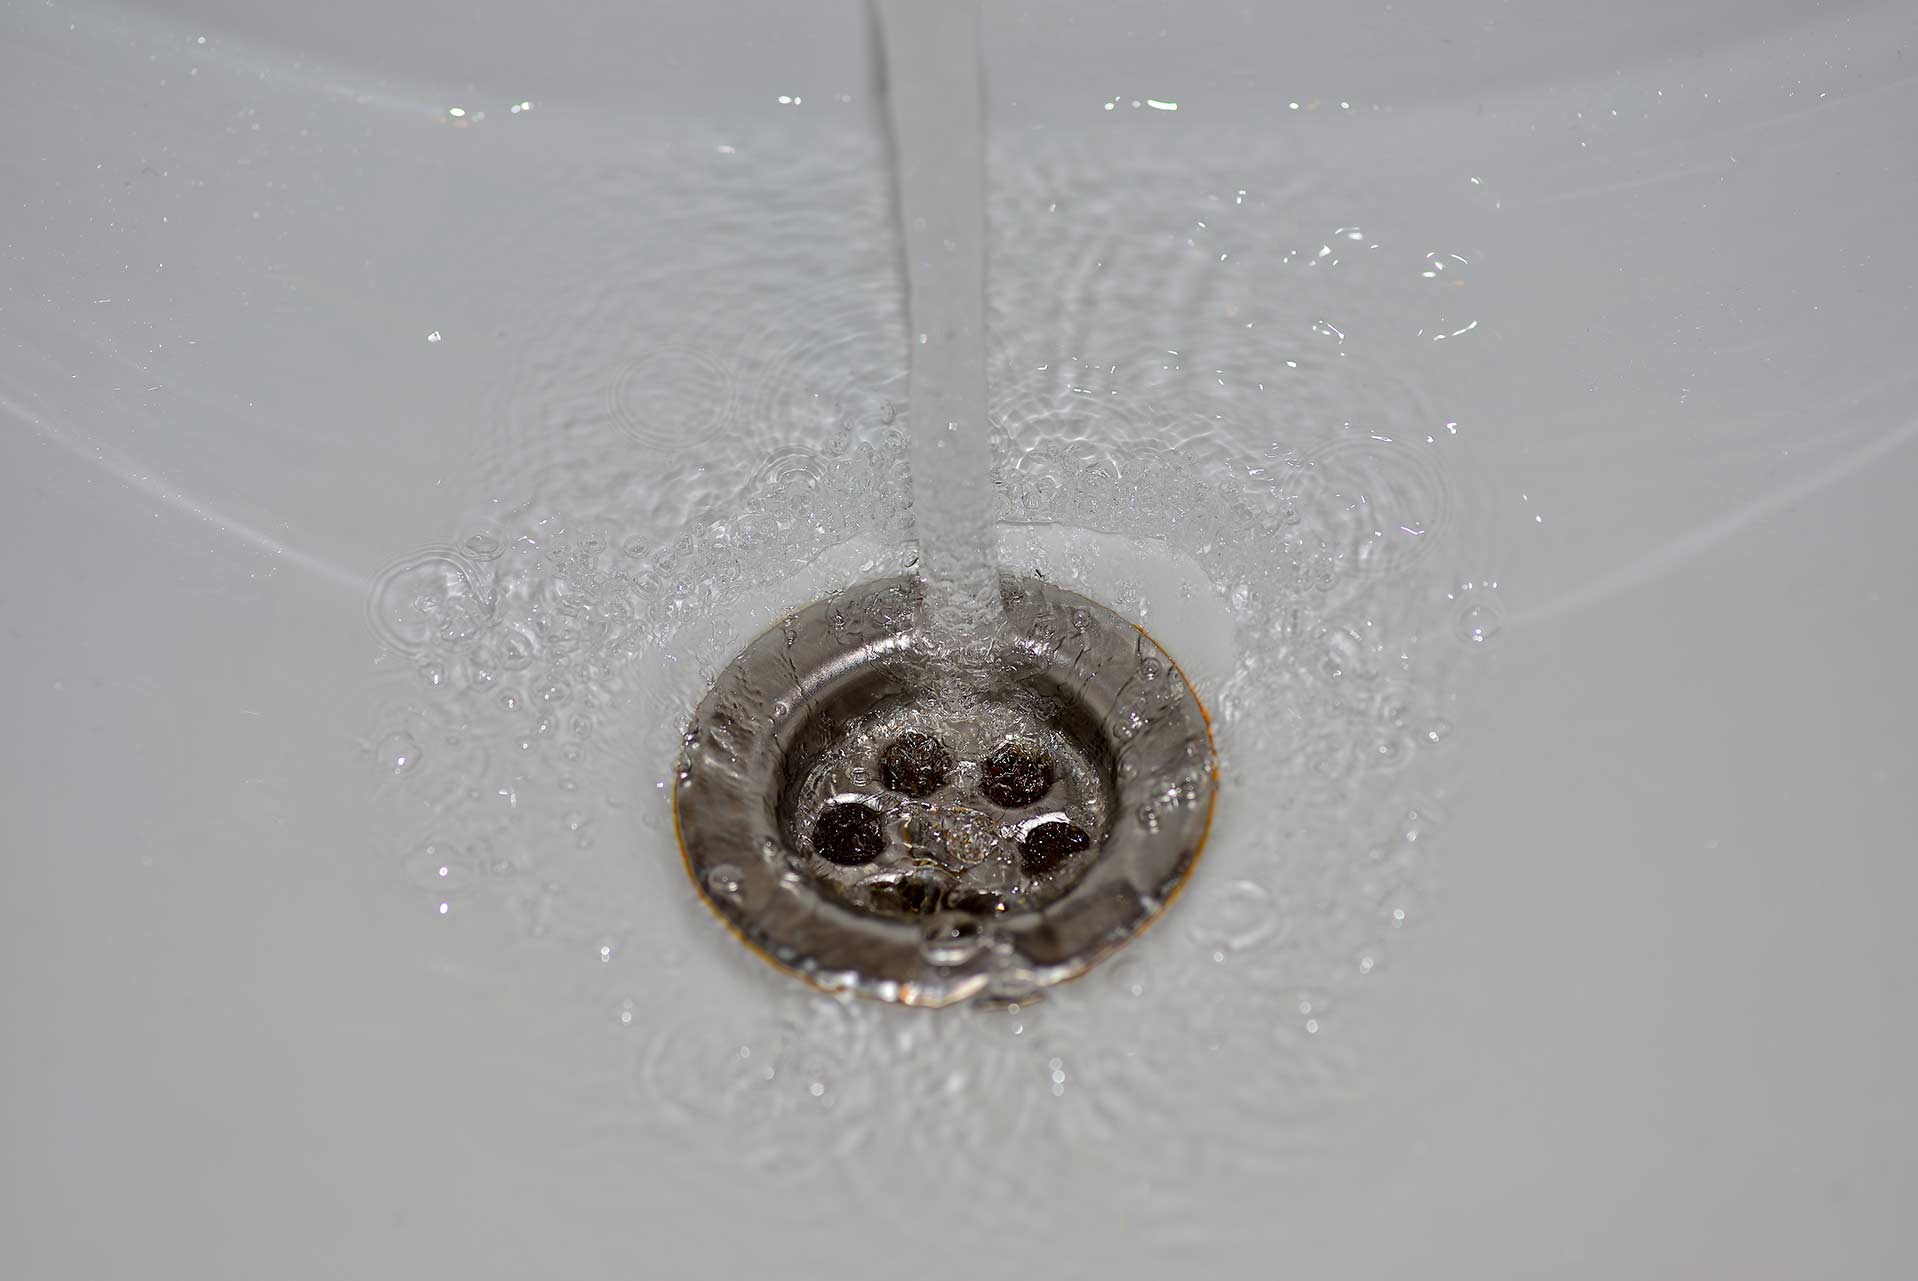 A2B Drains provides services to unblock blocked sinks and drains for properties in Epping Forest.